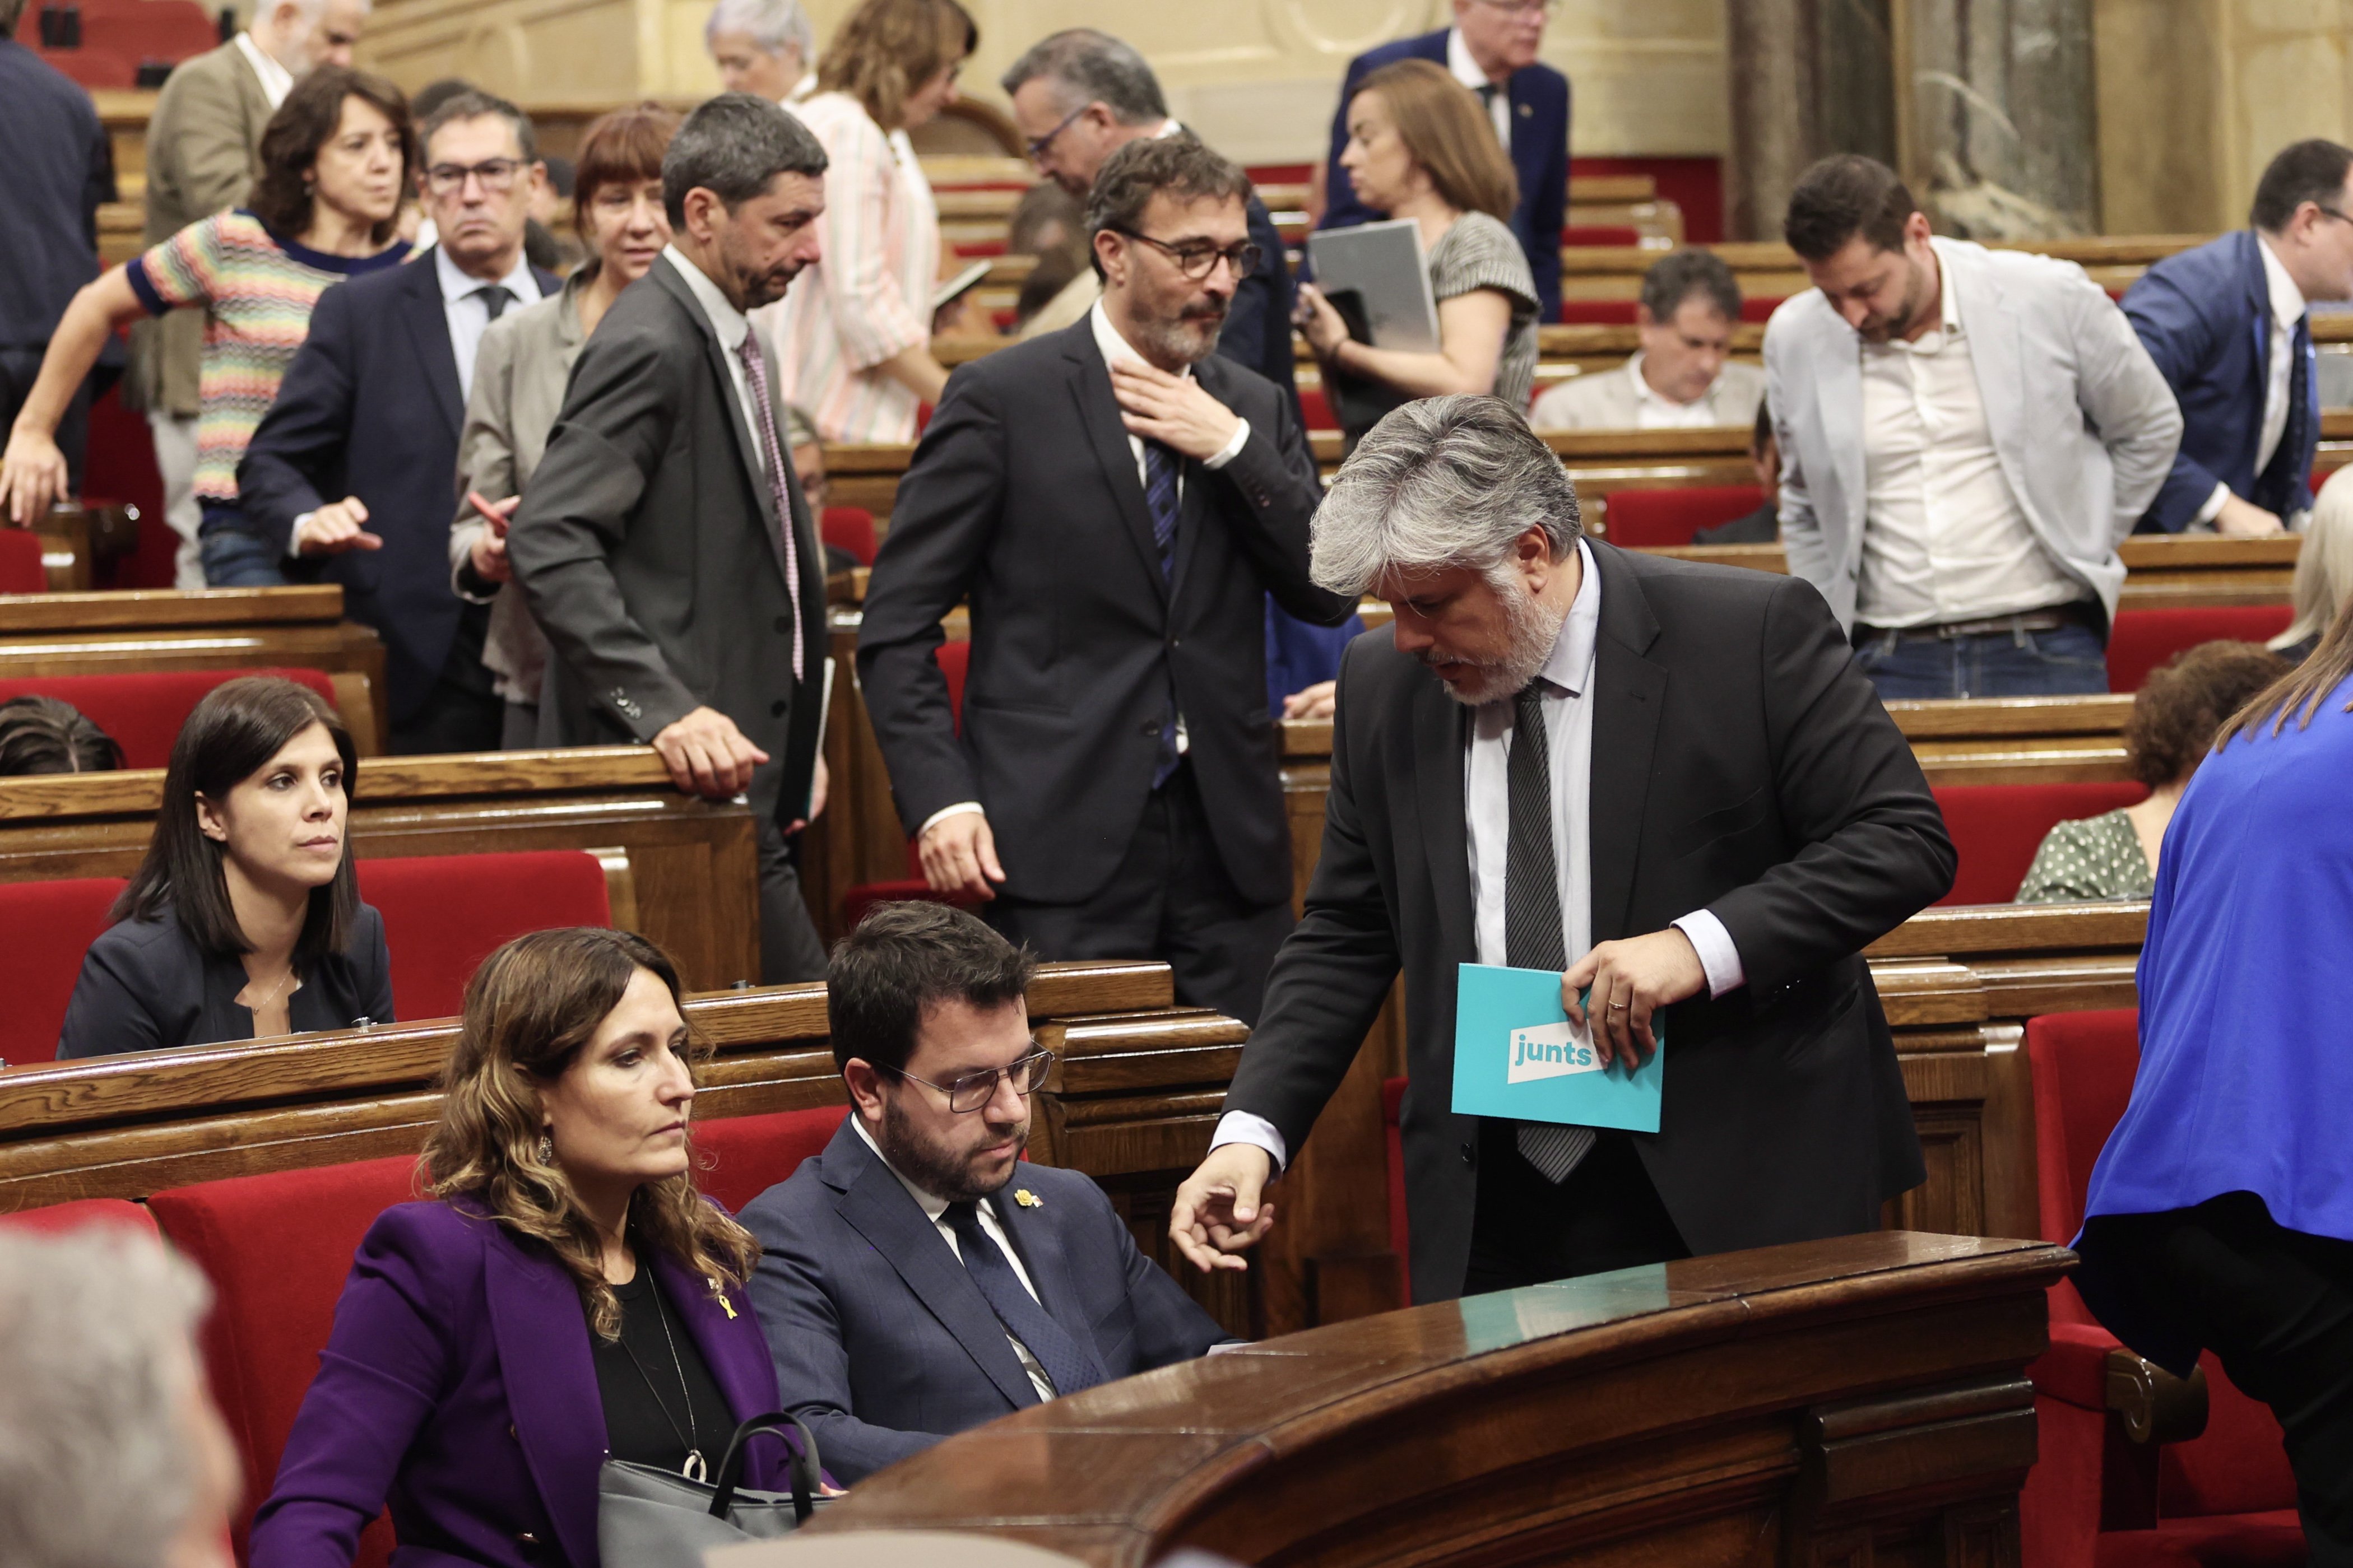 Junts links "discussing" budget with question of confidence in new Catalan government